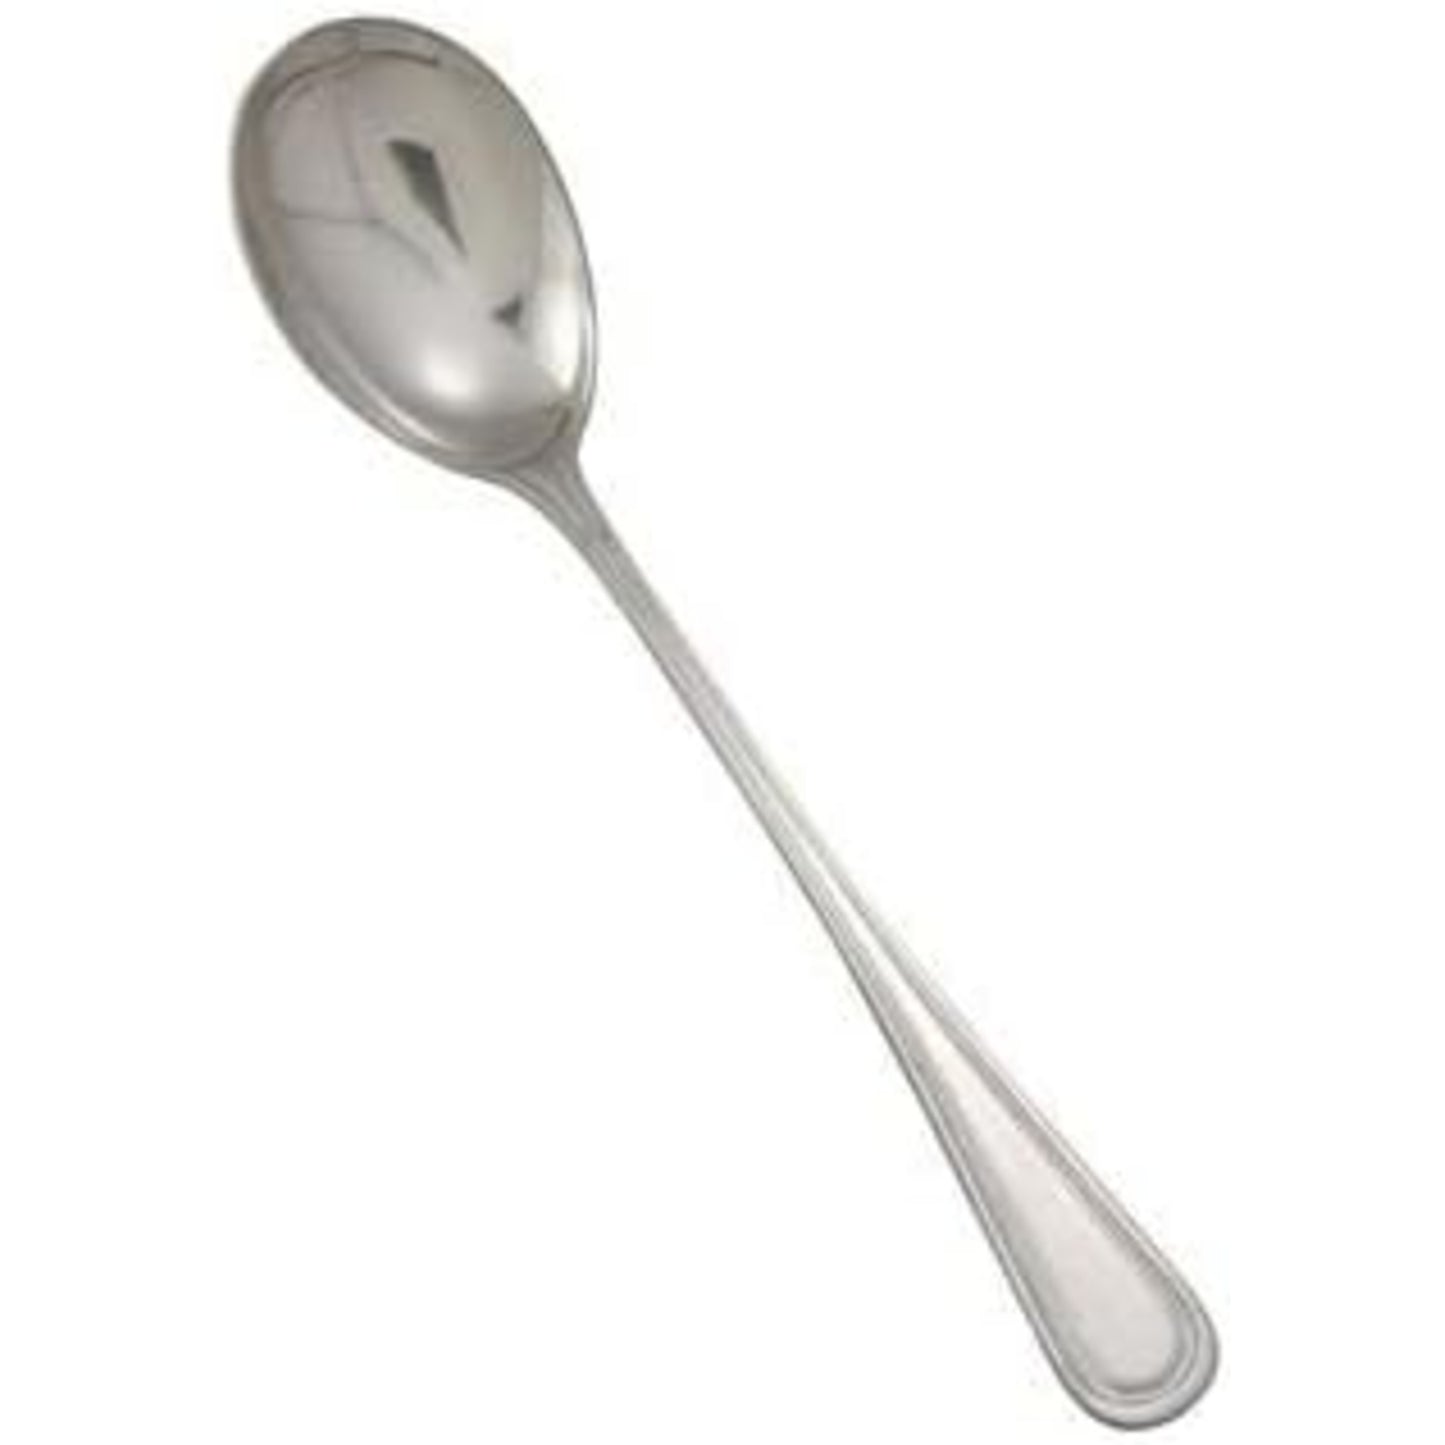 0030-23: Serving Spoon, Solid